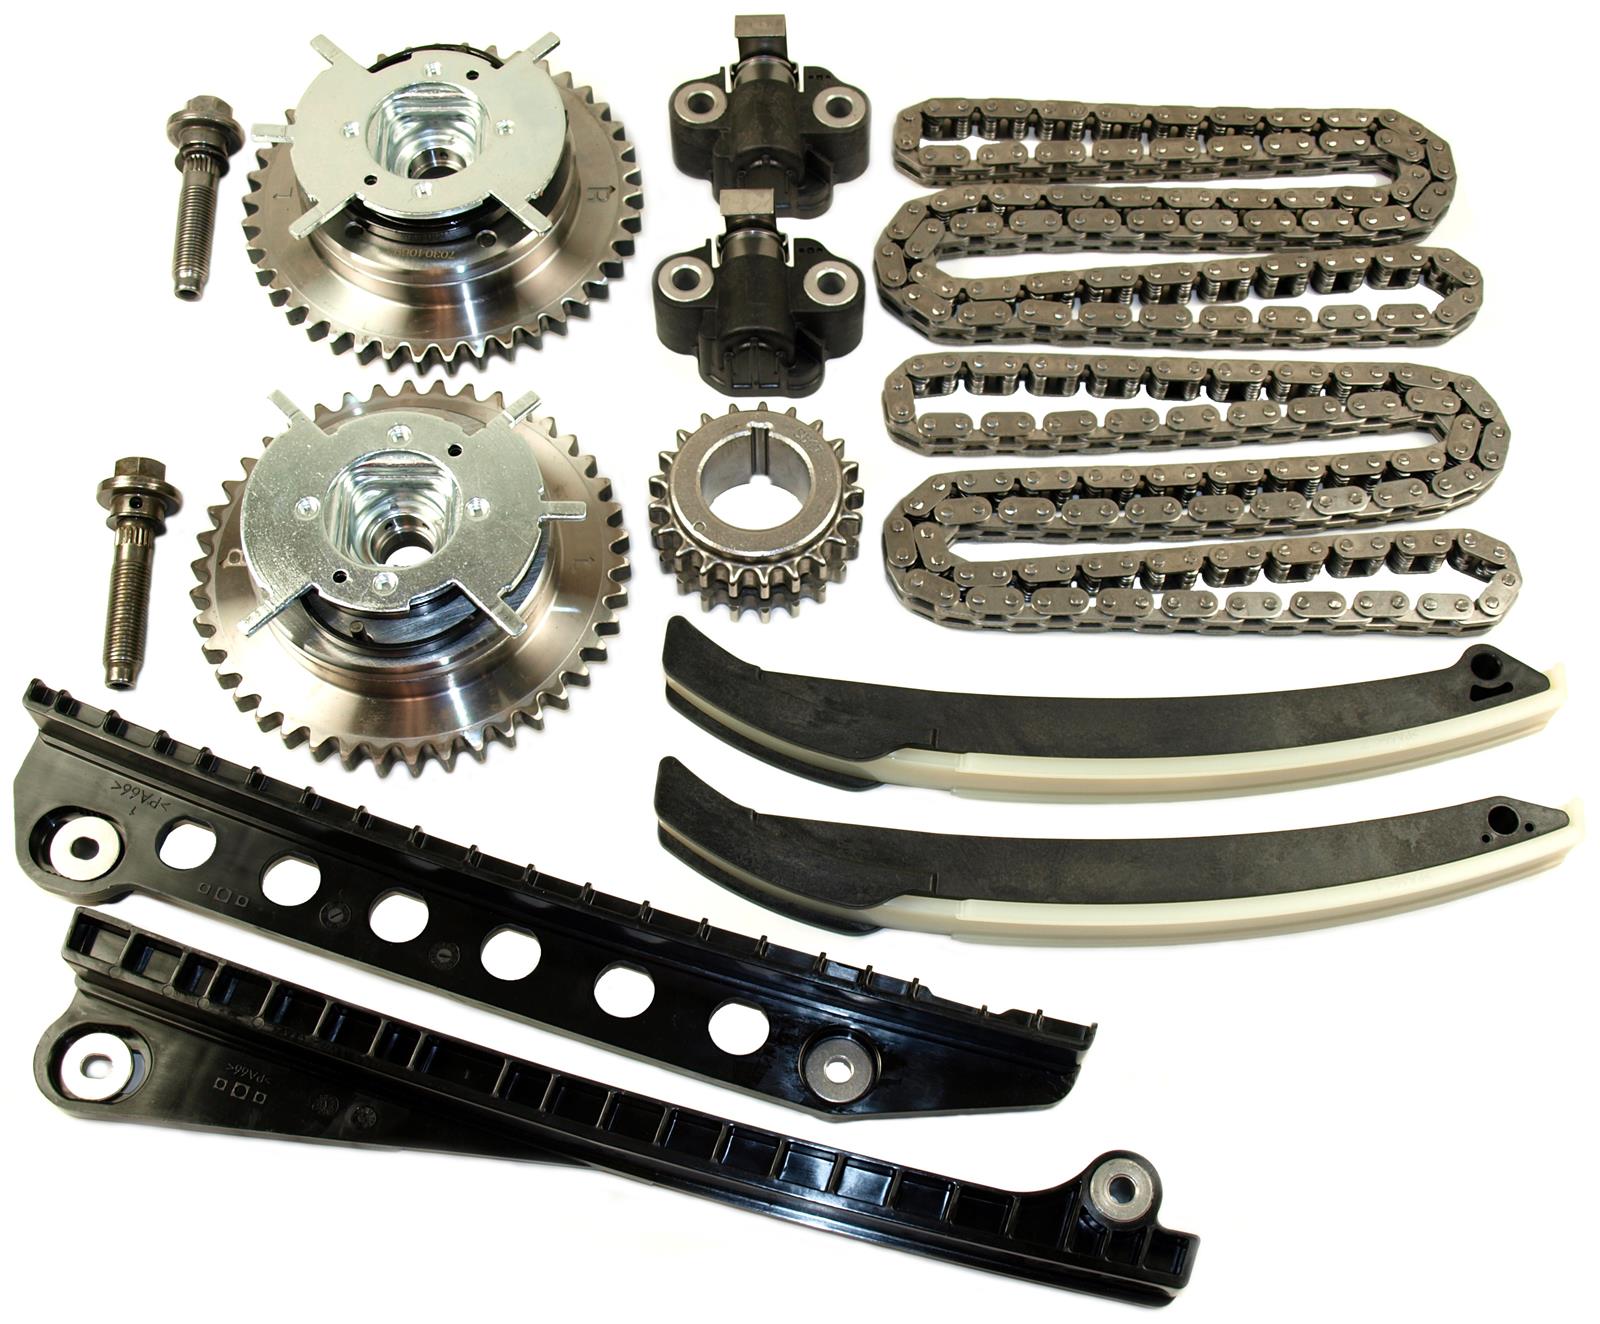 Cloyes 9-4200 Timing Chain 